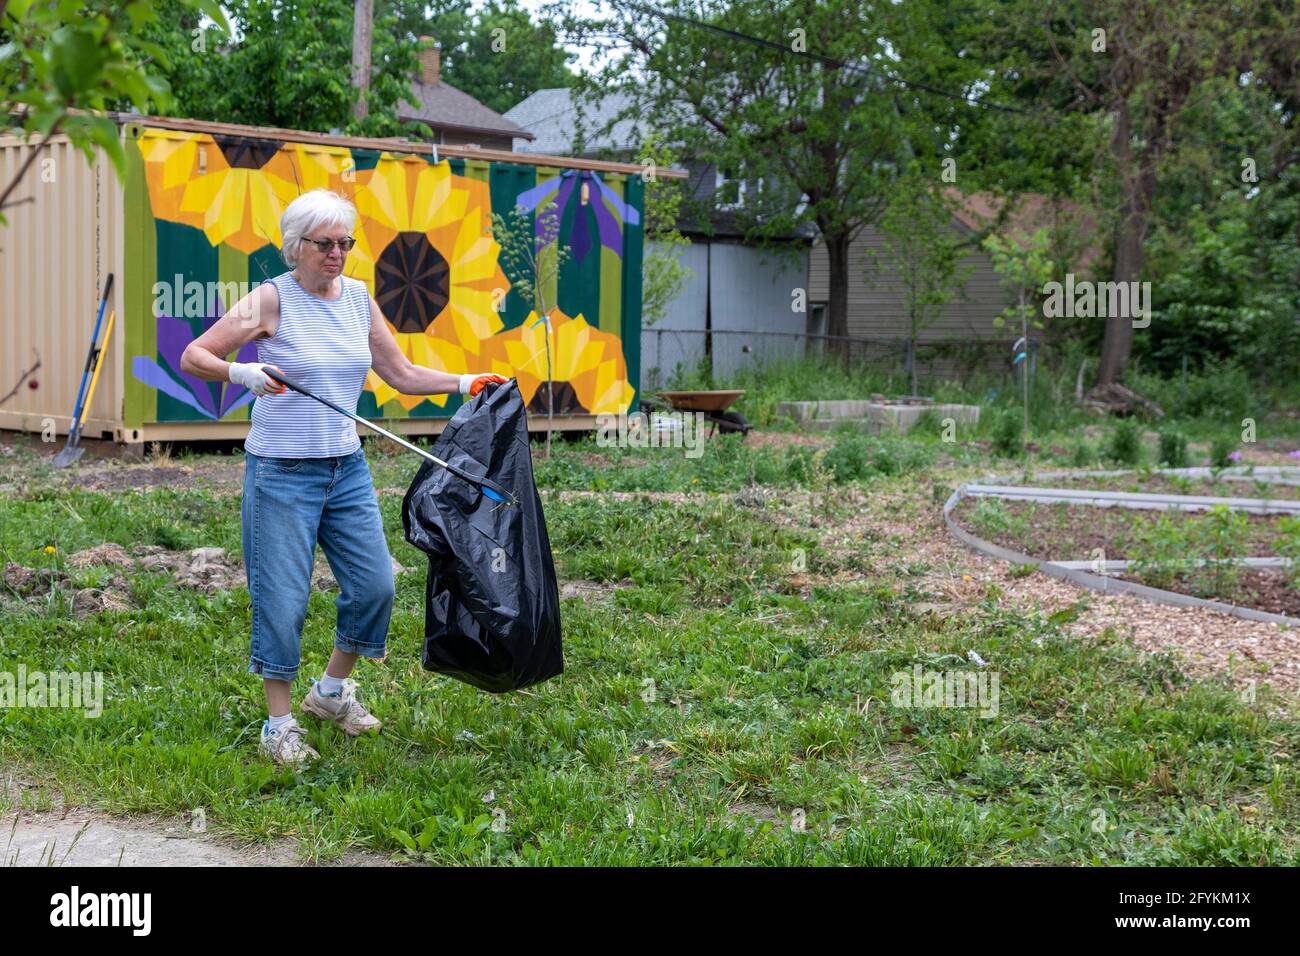 Detroit, Micigan -Susan Newell, 72, picks up litter in a garden during an annual citywide cleanup called the Motor City Makeover. Stock Photo